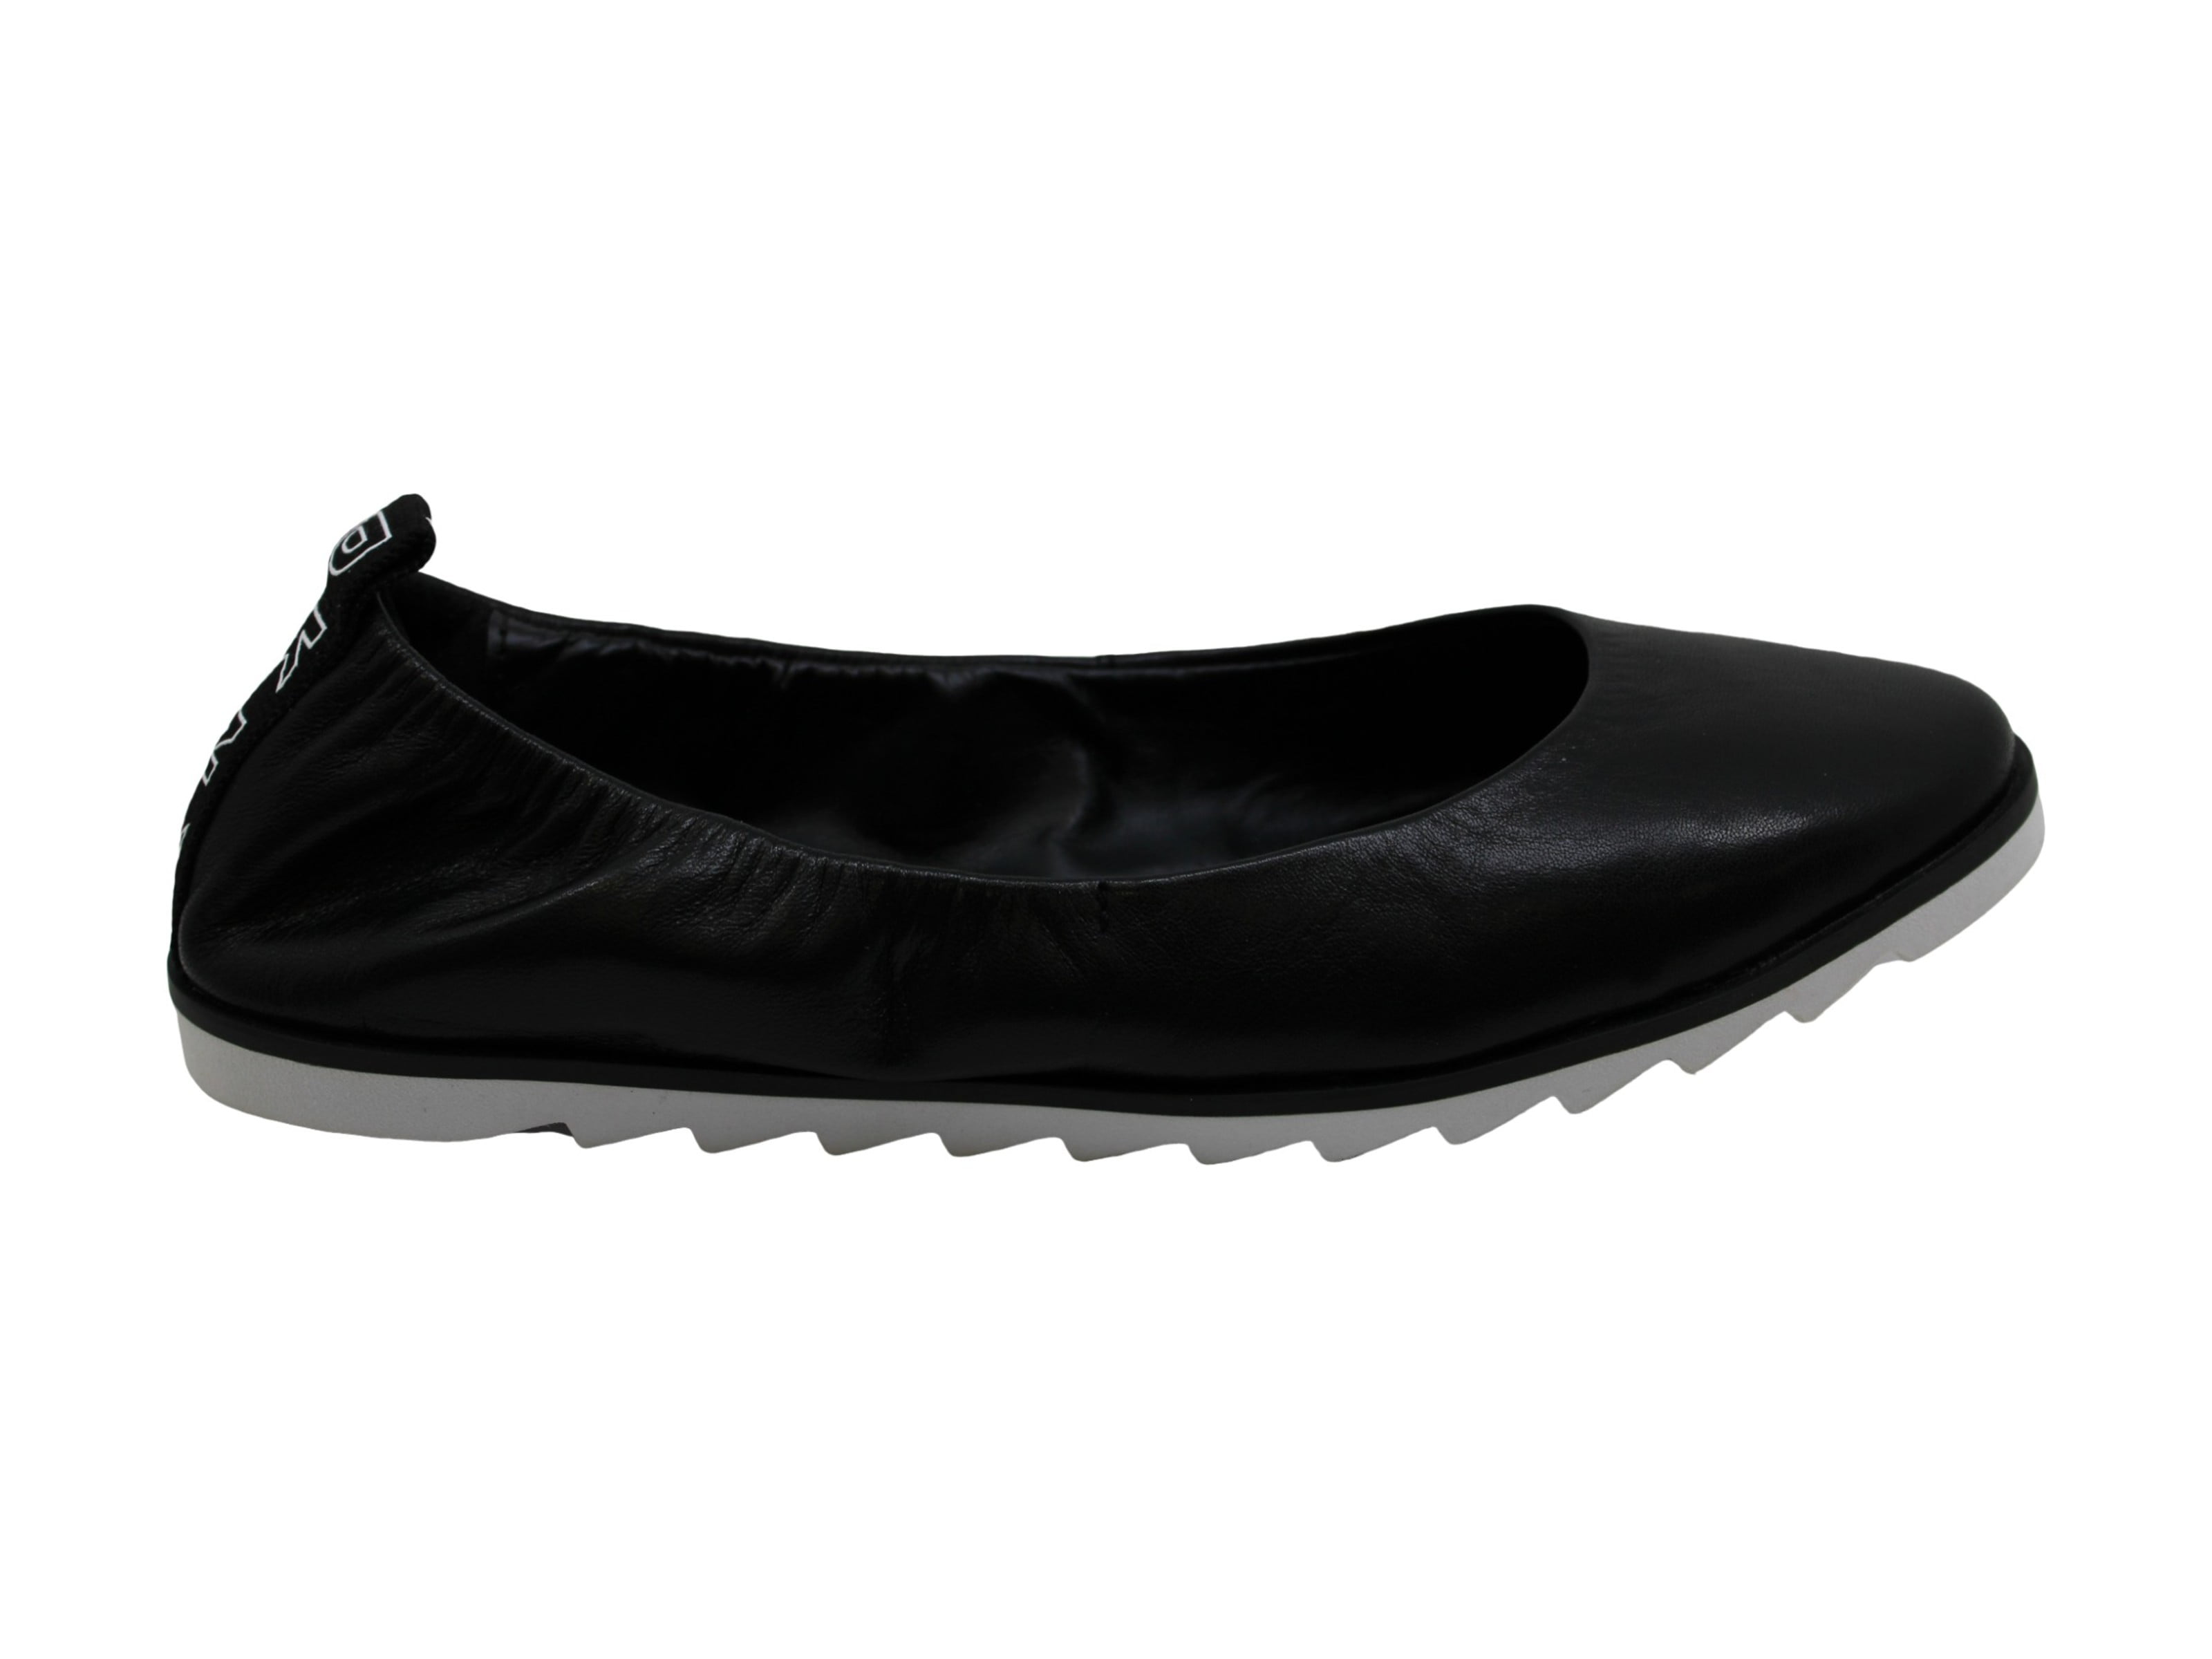 New Womens DKNY Black Queen Leather Shoes Ballerina Slip On